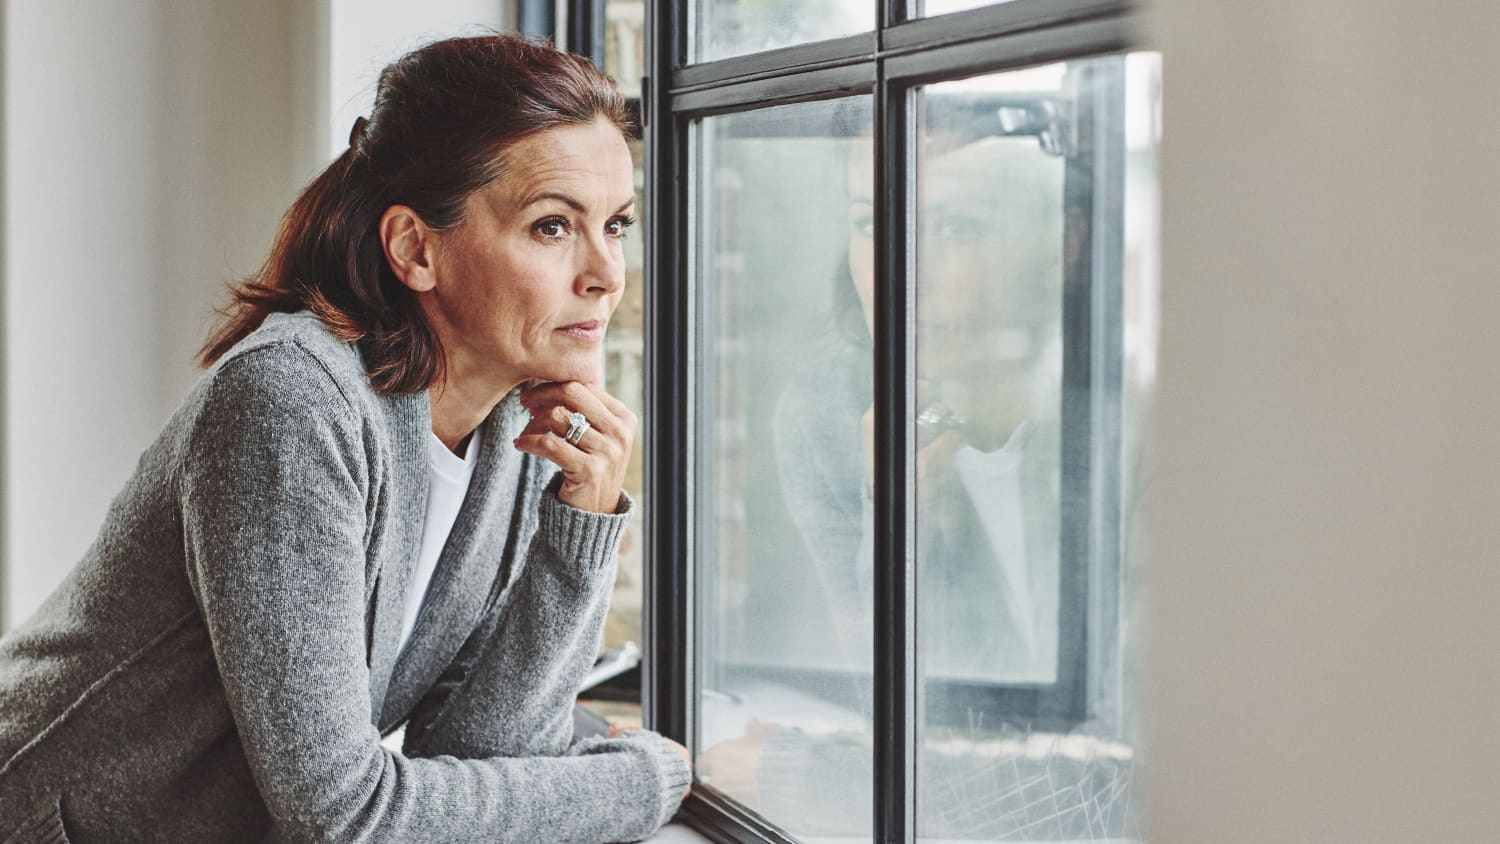 Thoughtful mature woman standing by the window, thinking about transvaginal mesh for pelvic organ prolapse